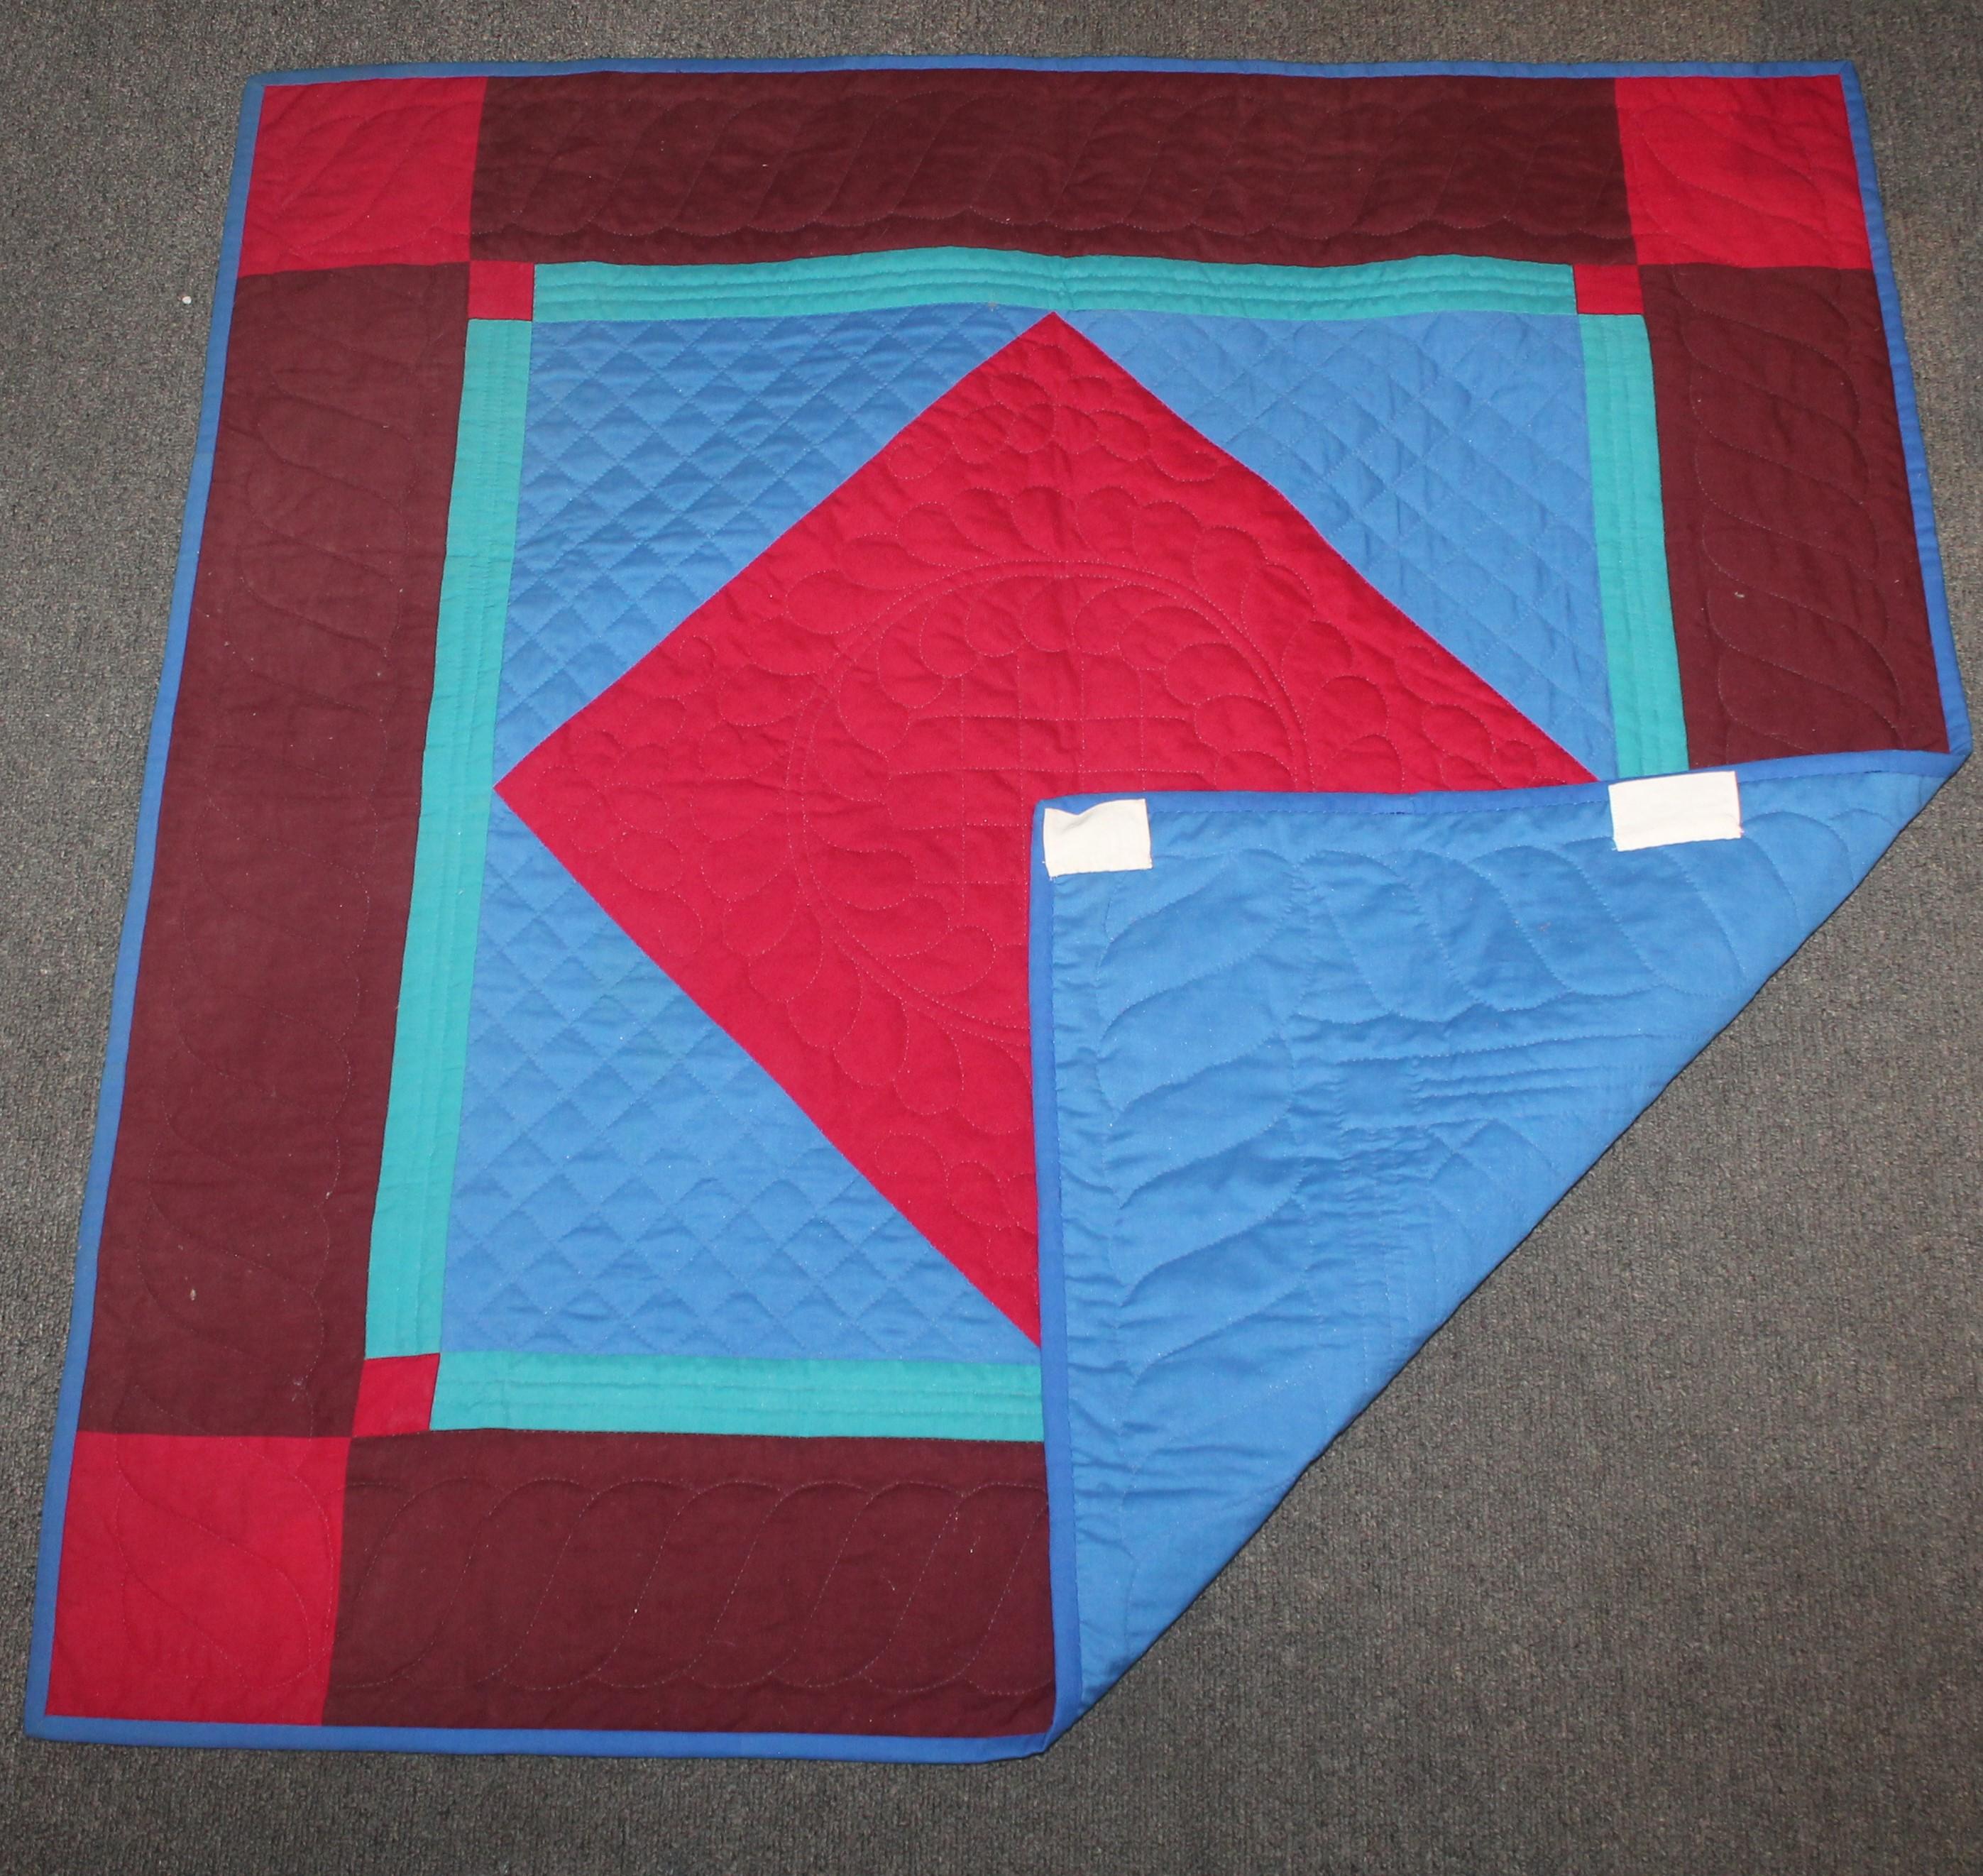 This fine all wool Lancaster, county, Pennsylvania crib quilt is in very fine condition and is from 1958. It has the very finest tight quilting and was from a private home in Lancaster. The colors are amazing and very fine wool. Late but great!